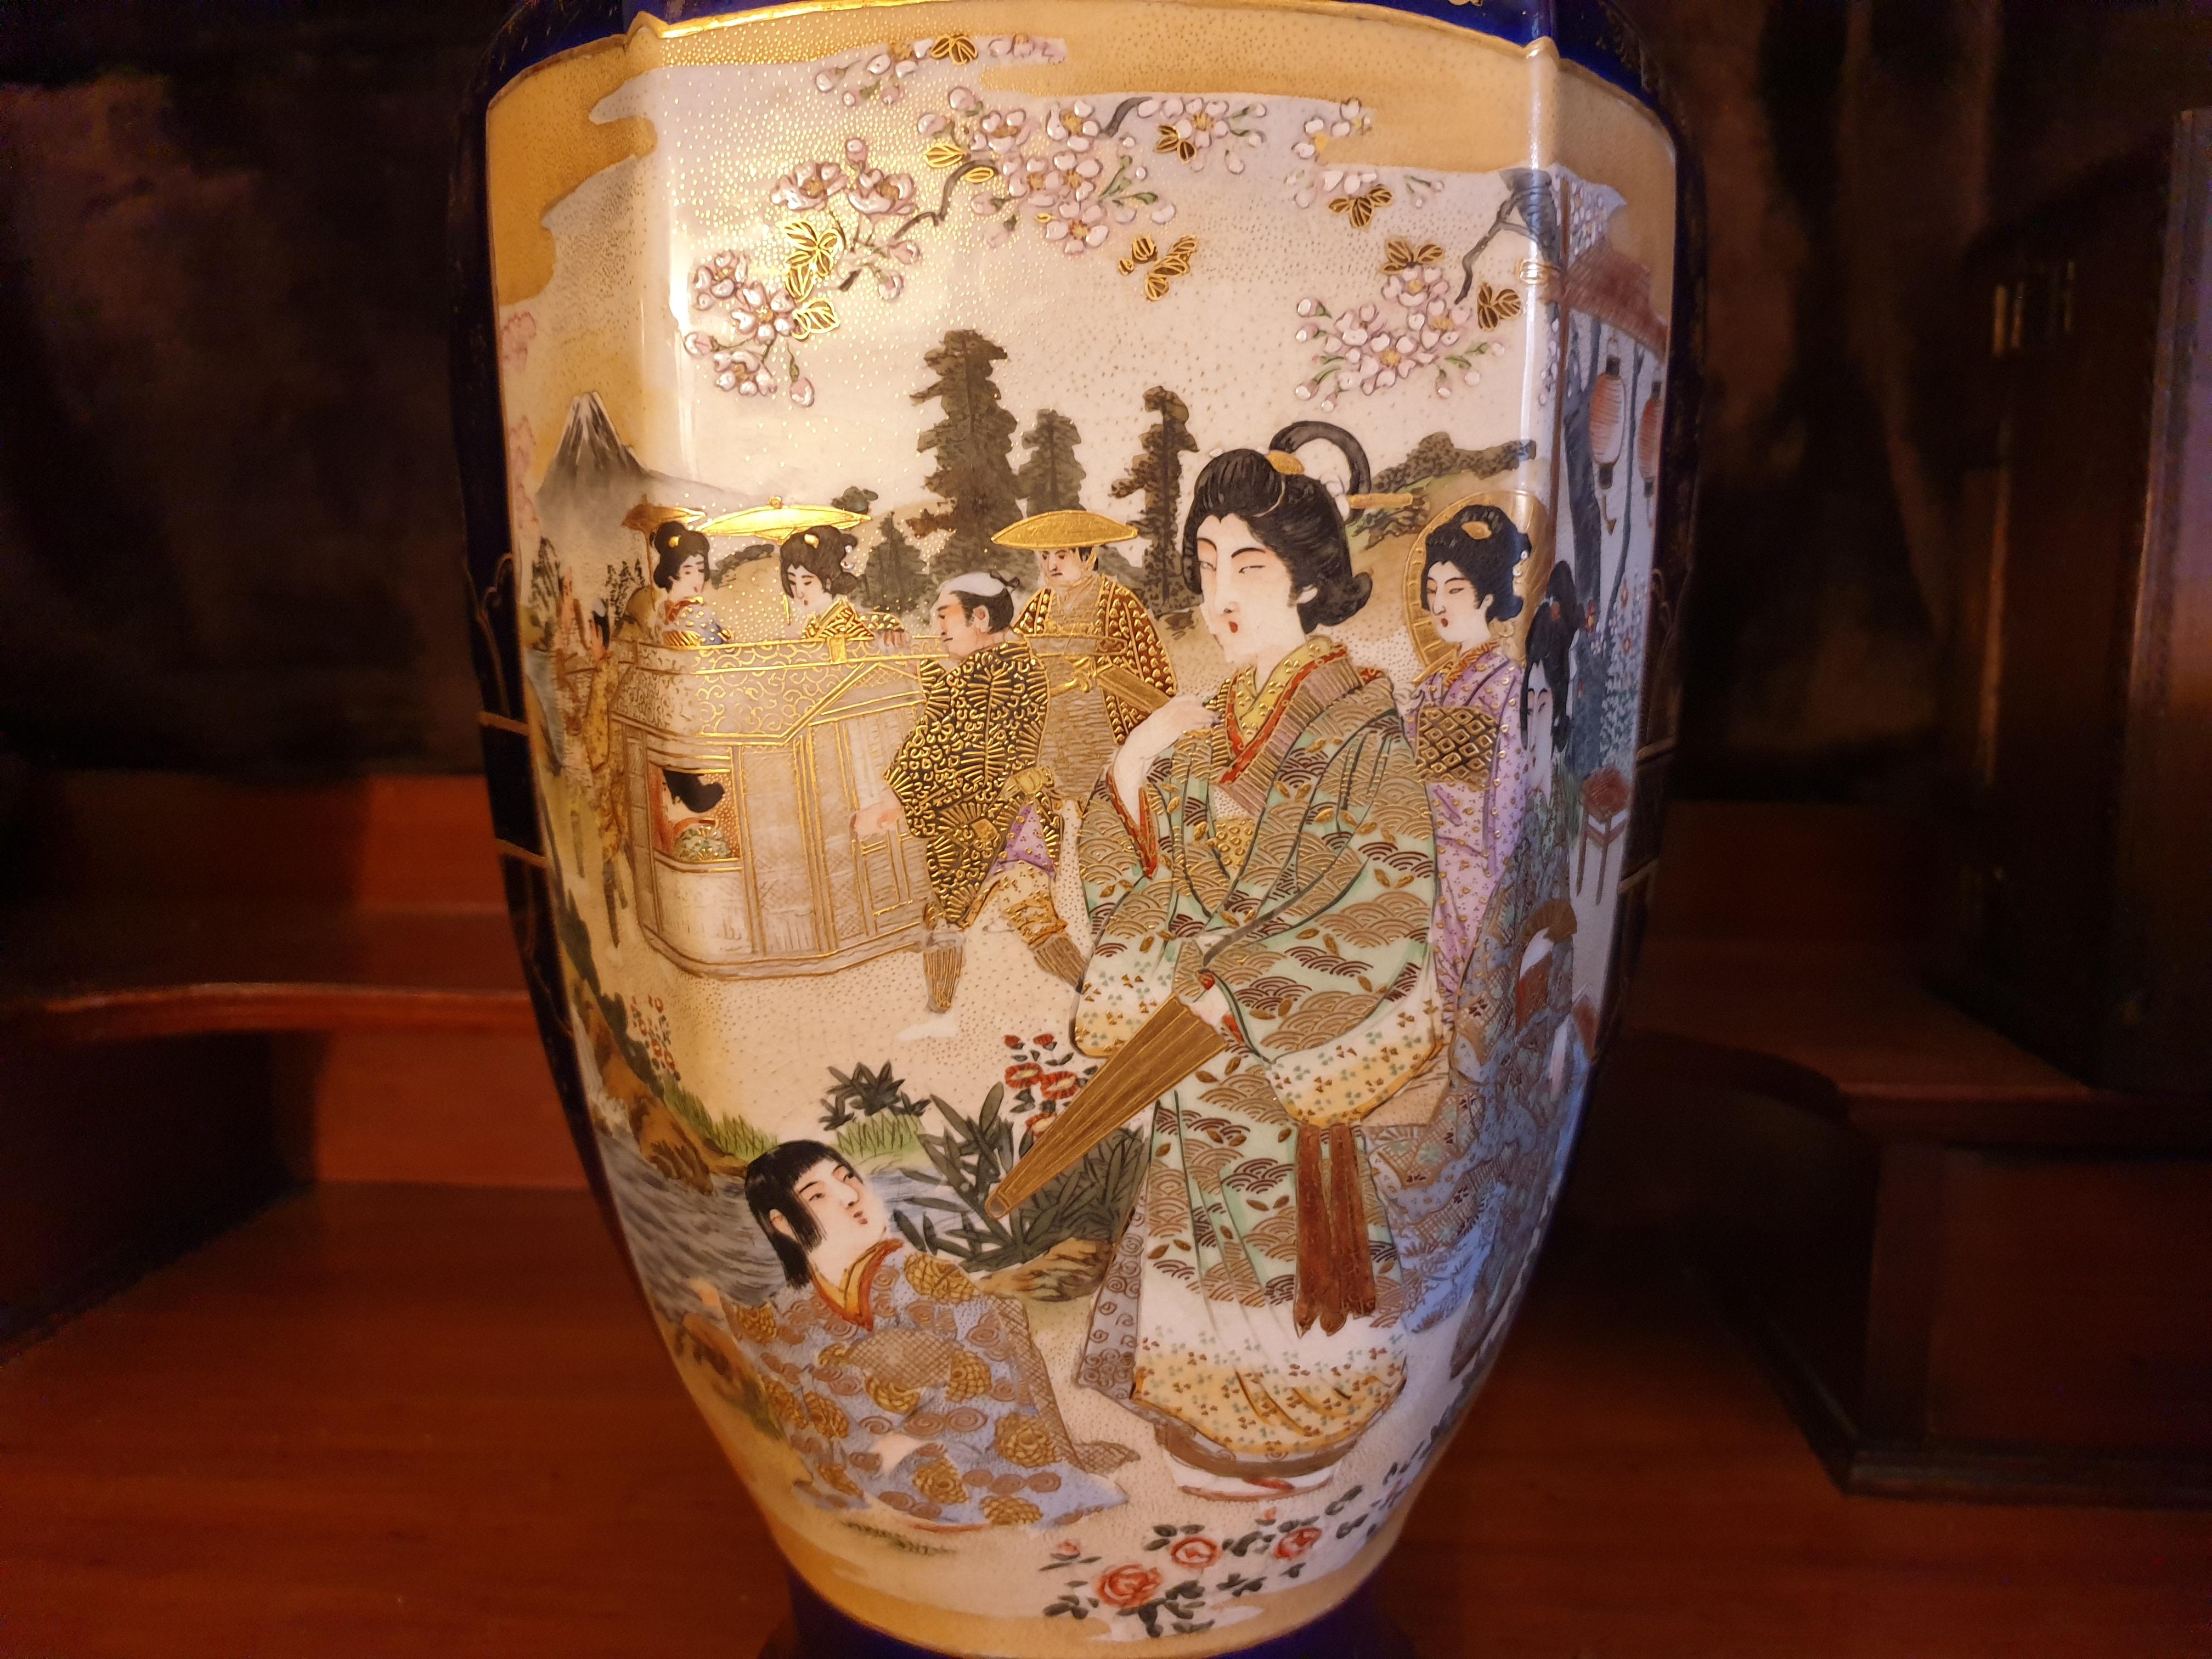 Meiji Period Pair of Japanese Satsuma Vases 19th Century With Imperial Scenes  For Sale 5